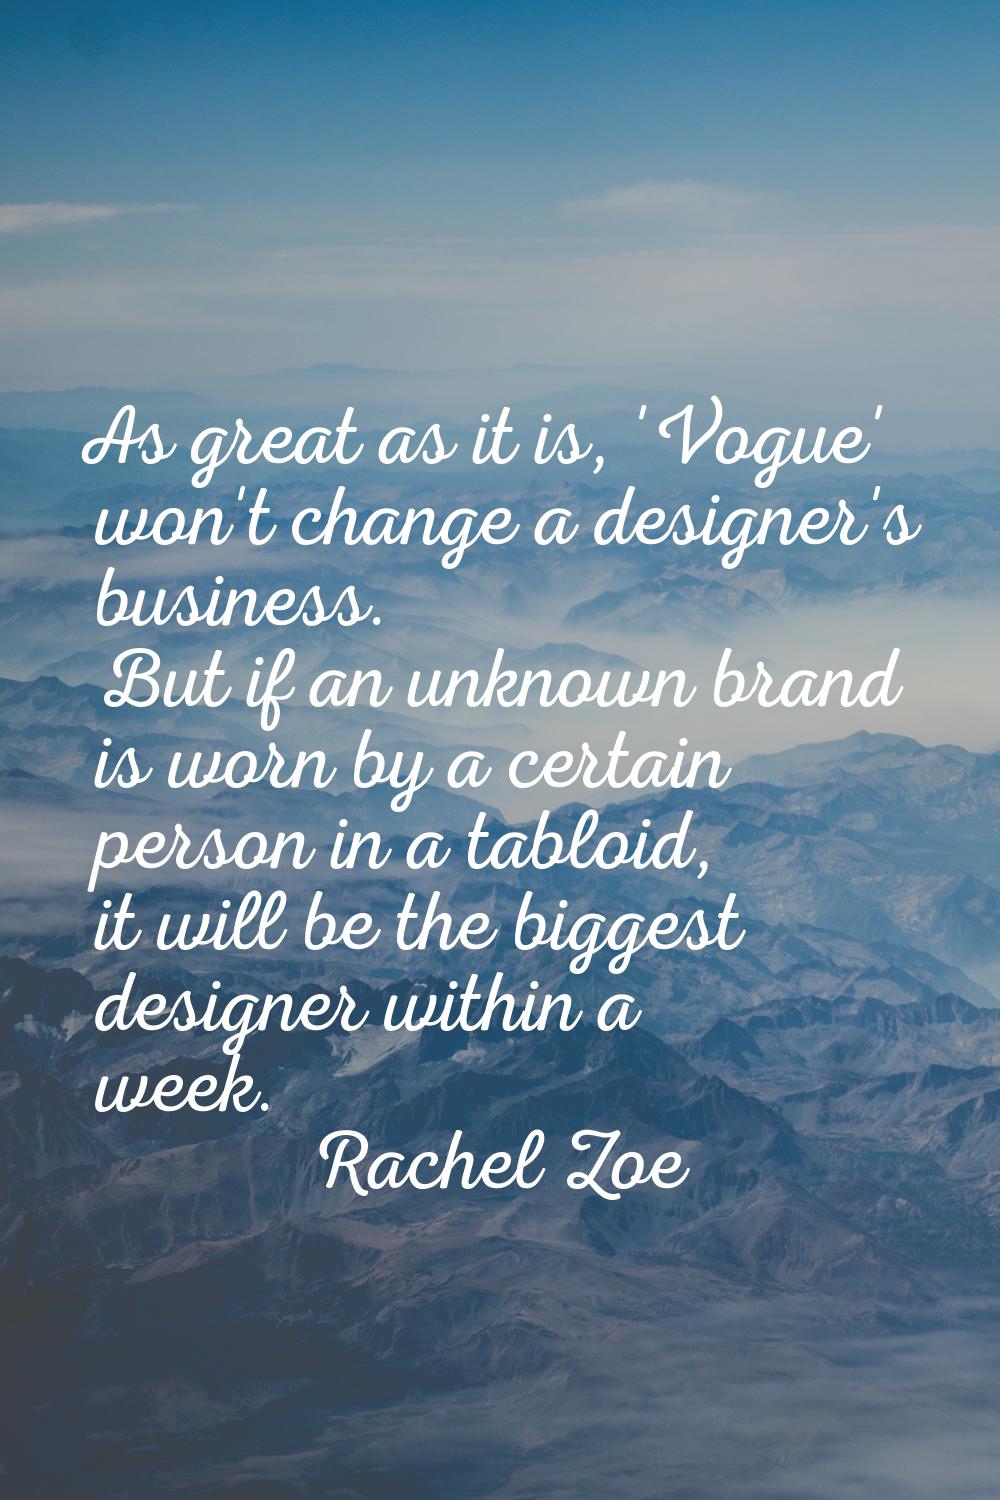 As great as it is, 'Vogue' won't change a designer's business. But if an unknown brand is worn by a